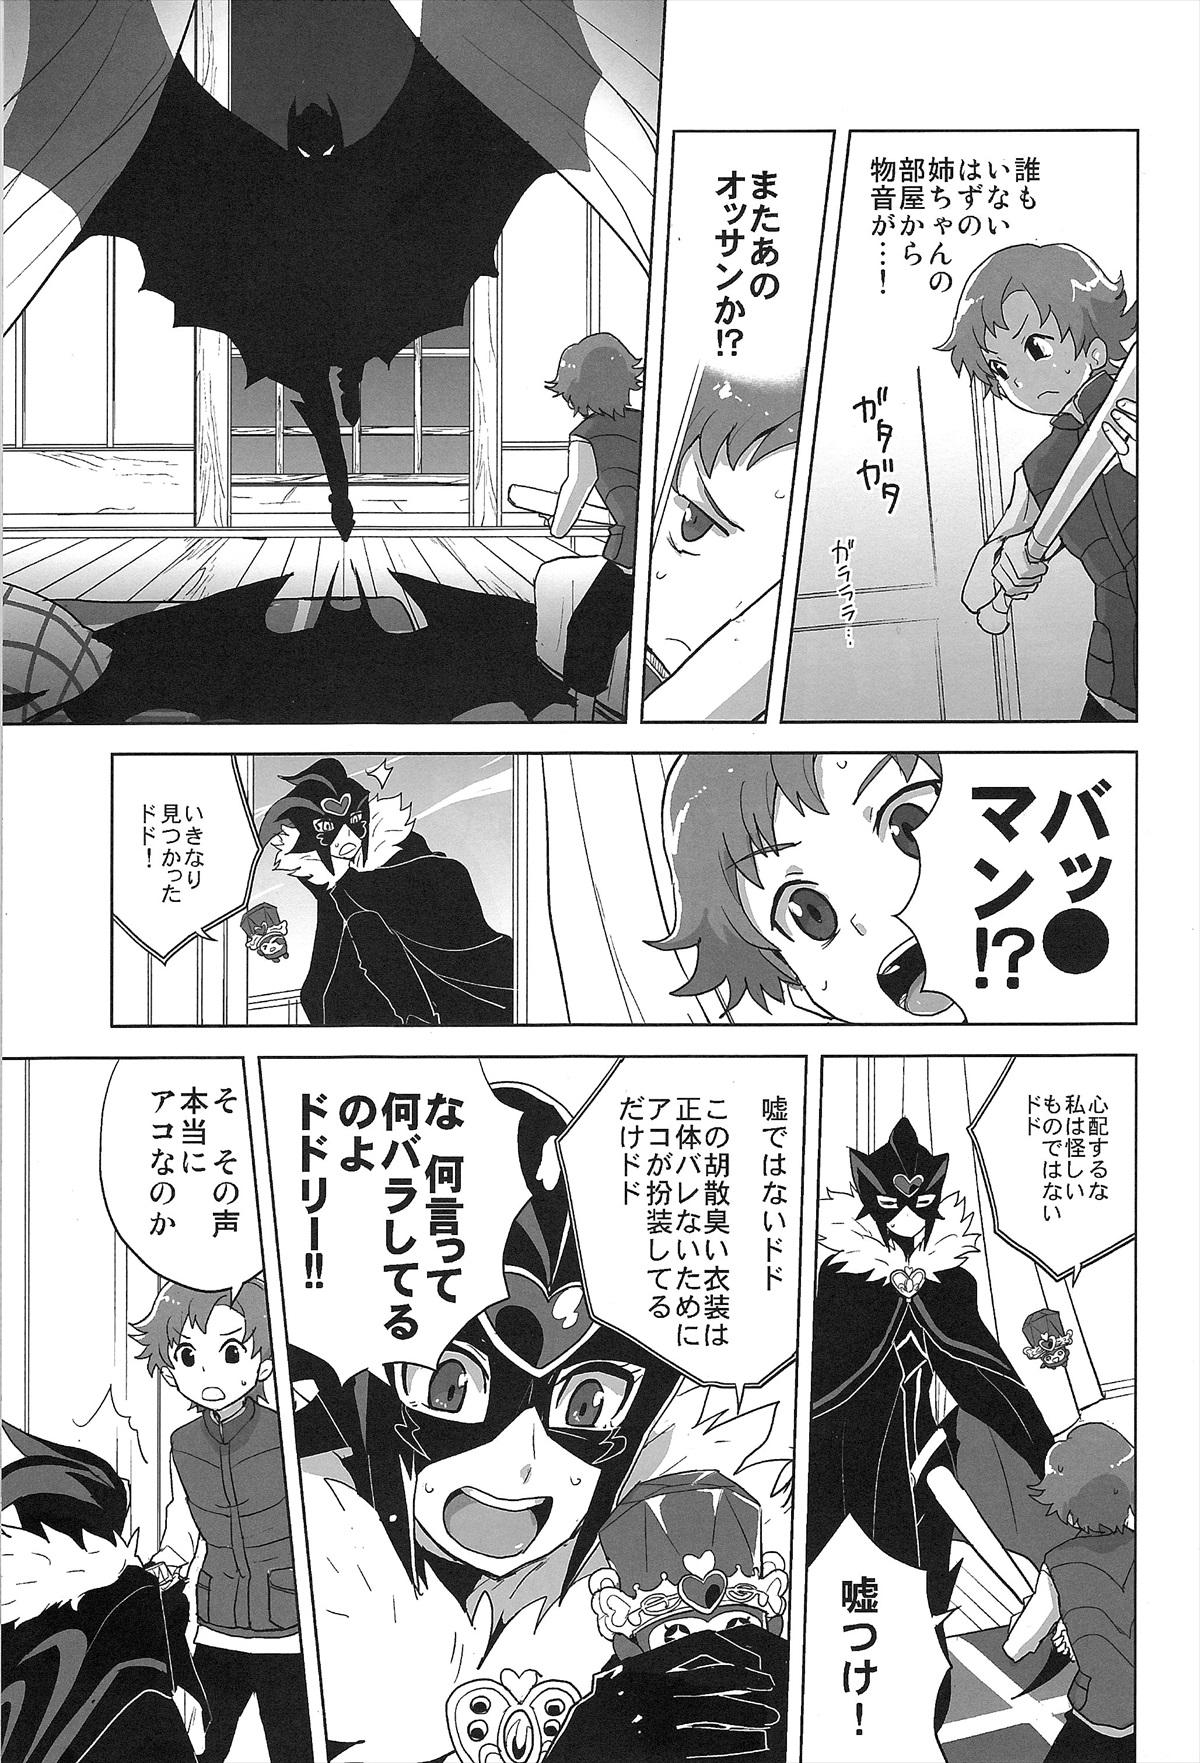 Old And Young Muse! x3 - Suite precure Brasileiro - Page 6